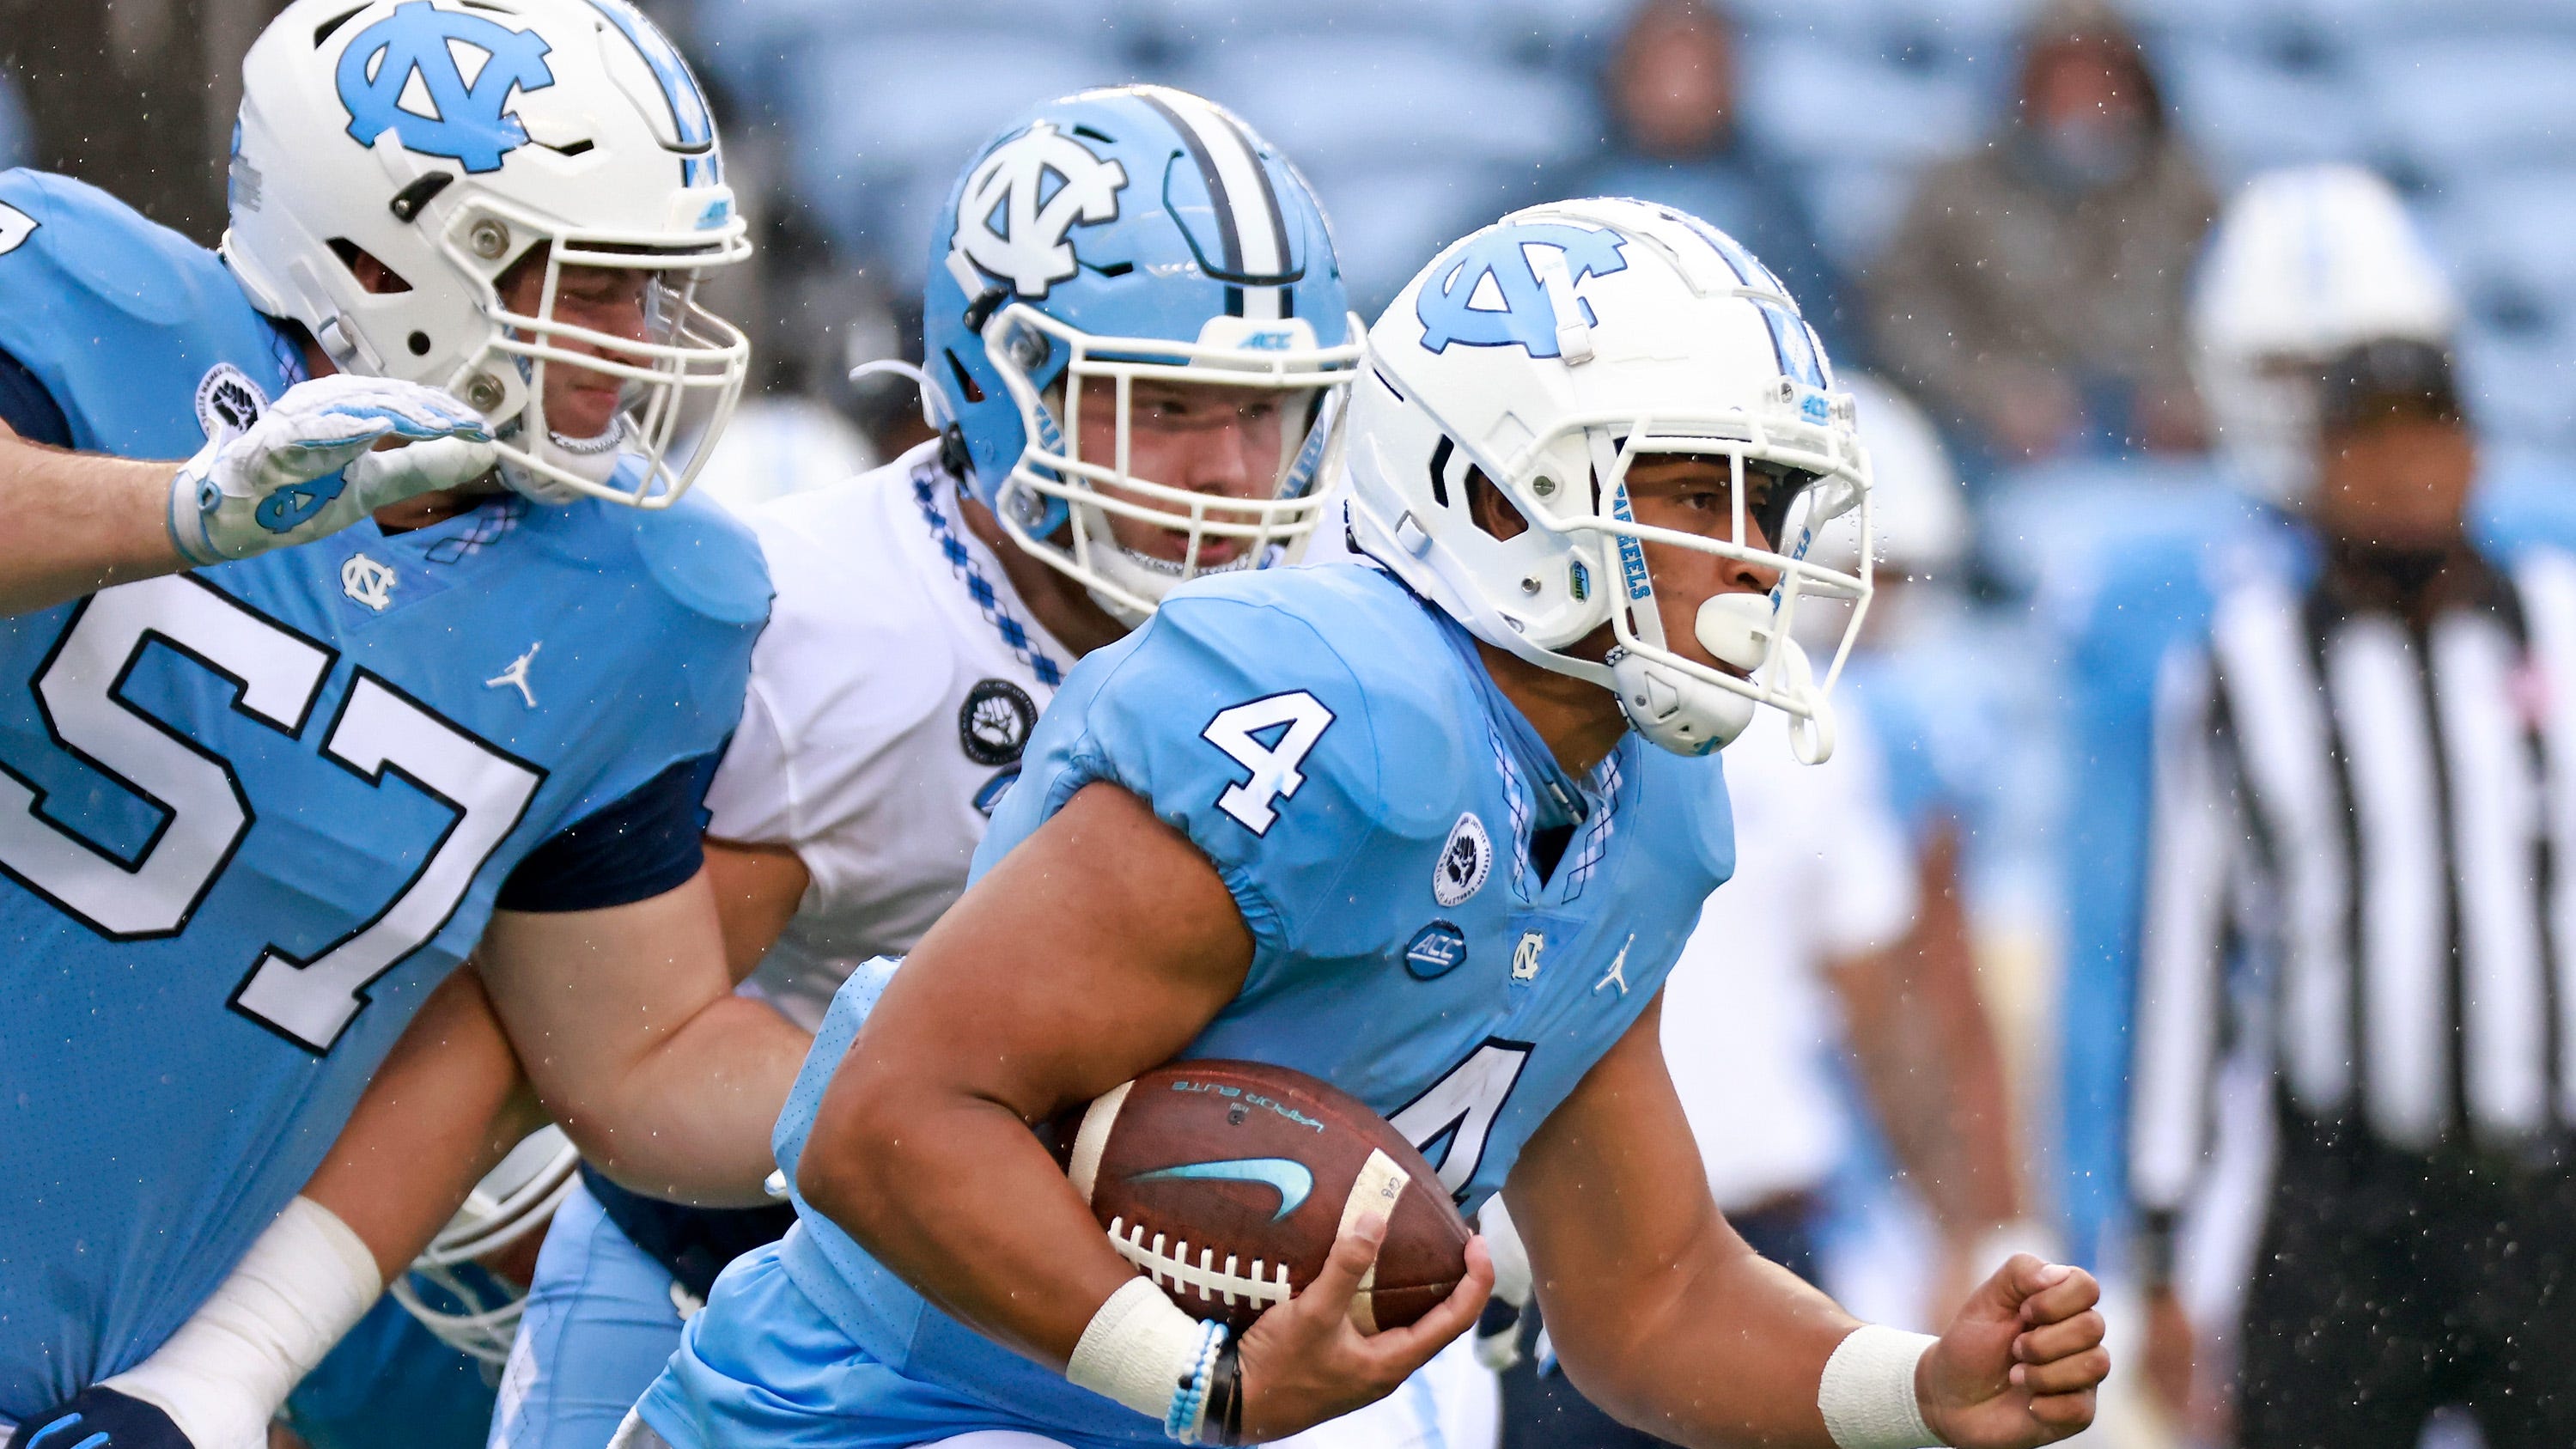 Early enrollee UNC freshmen make their presence known all over the football field